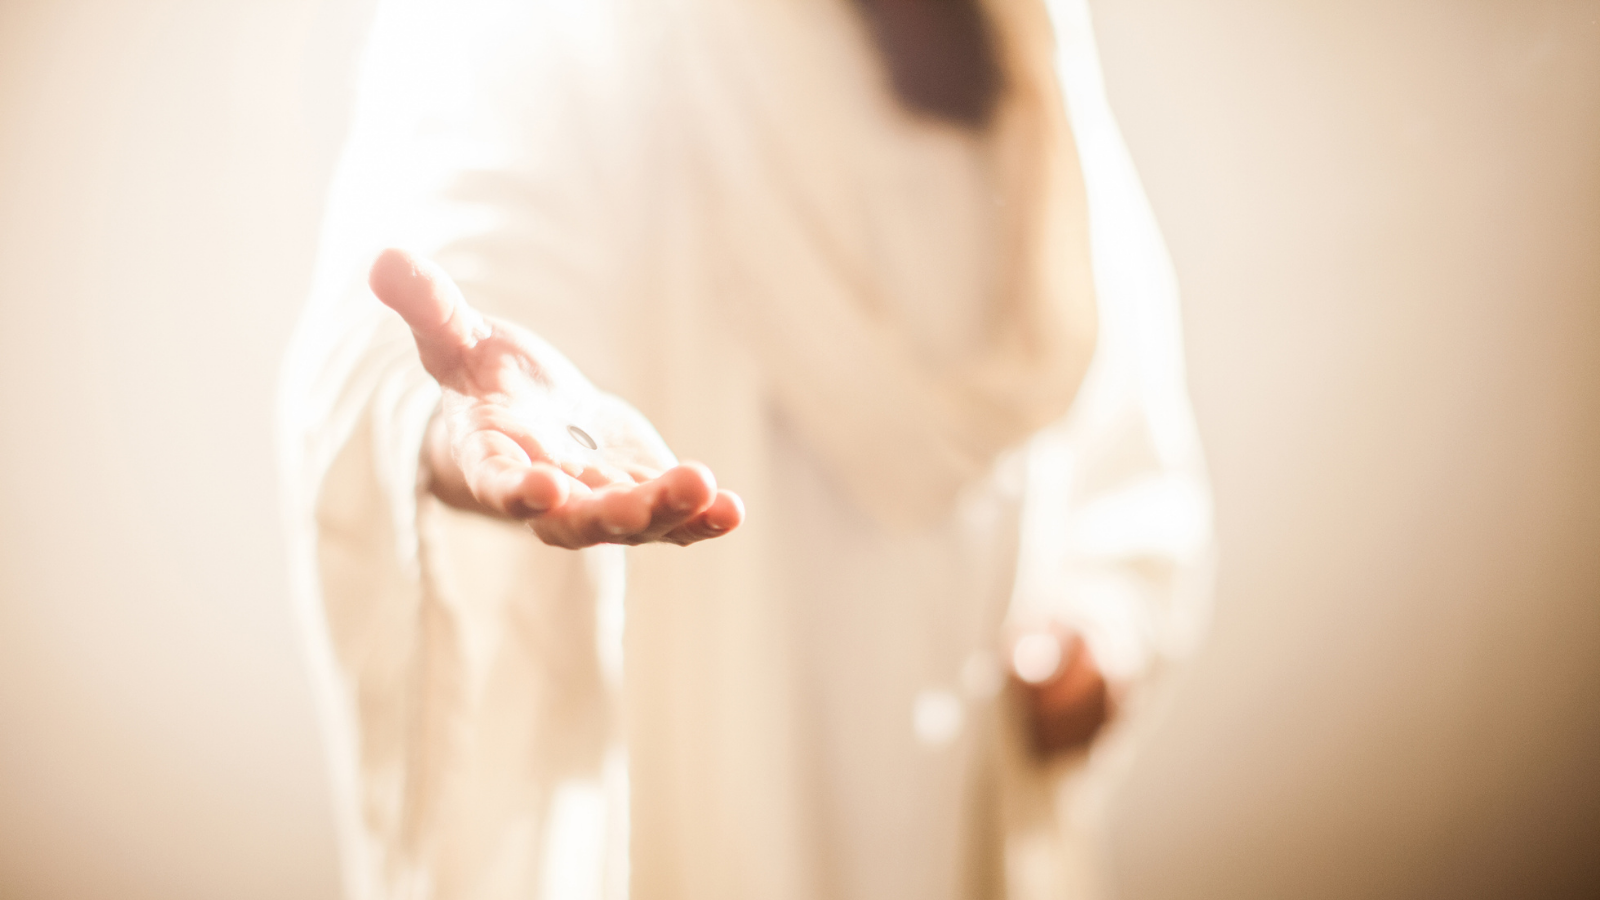 Jesus in a white robe holding out his hand.